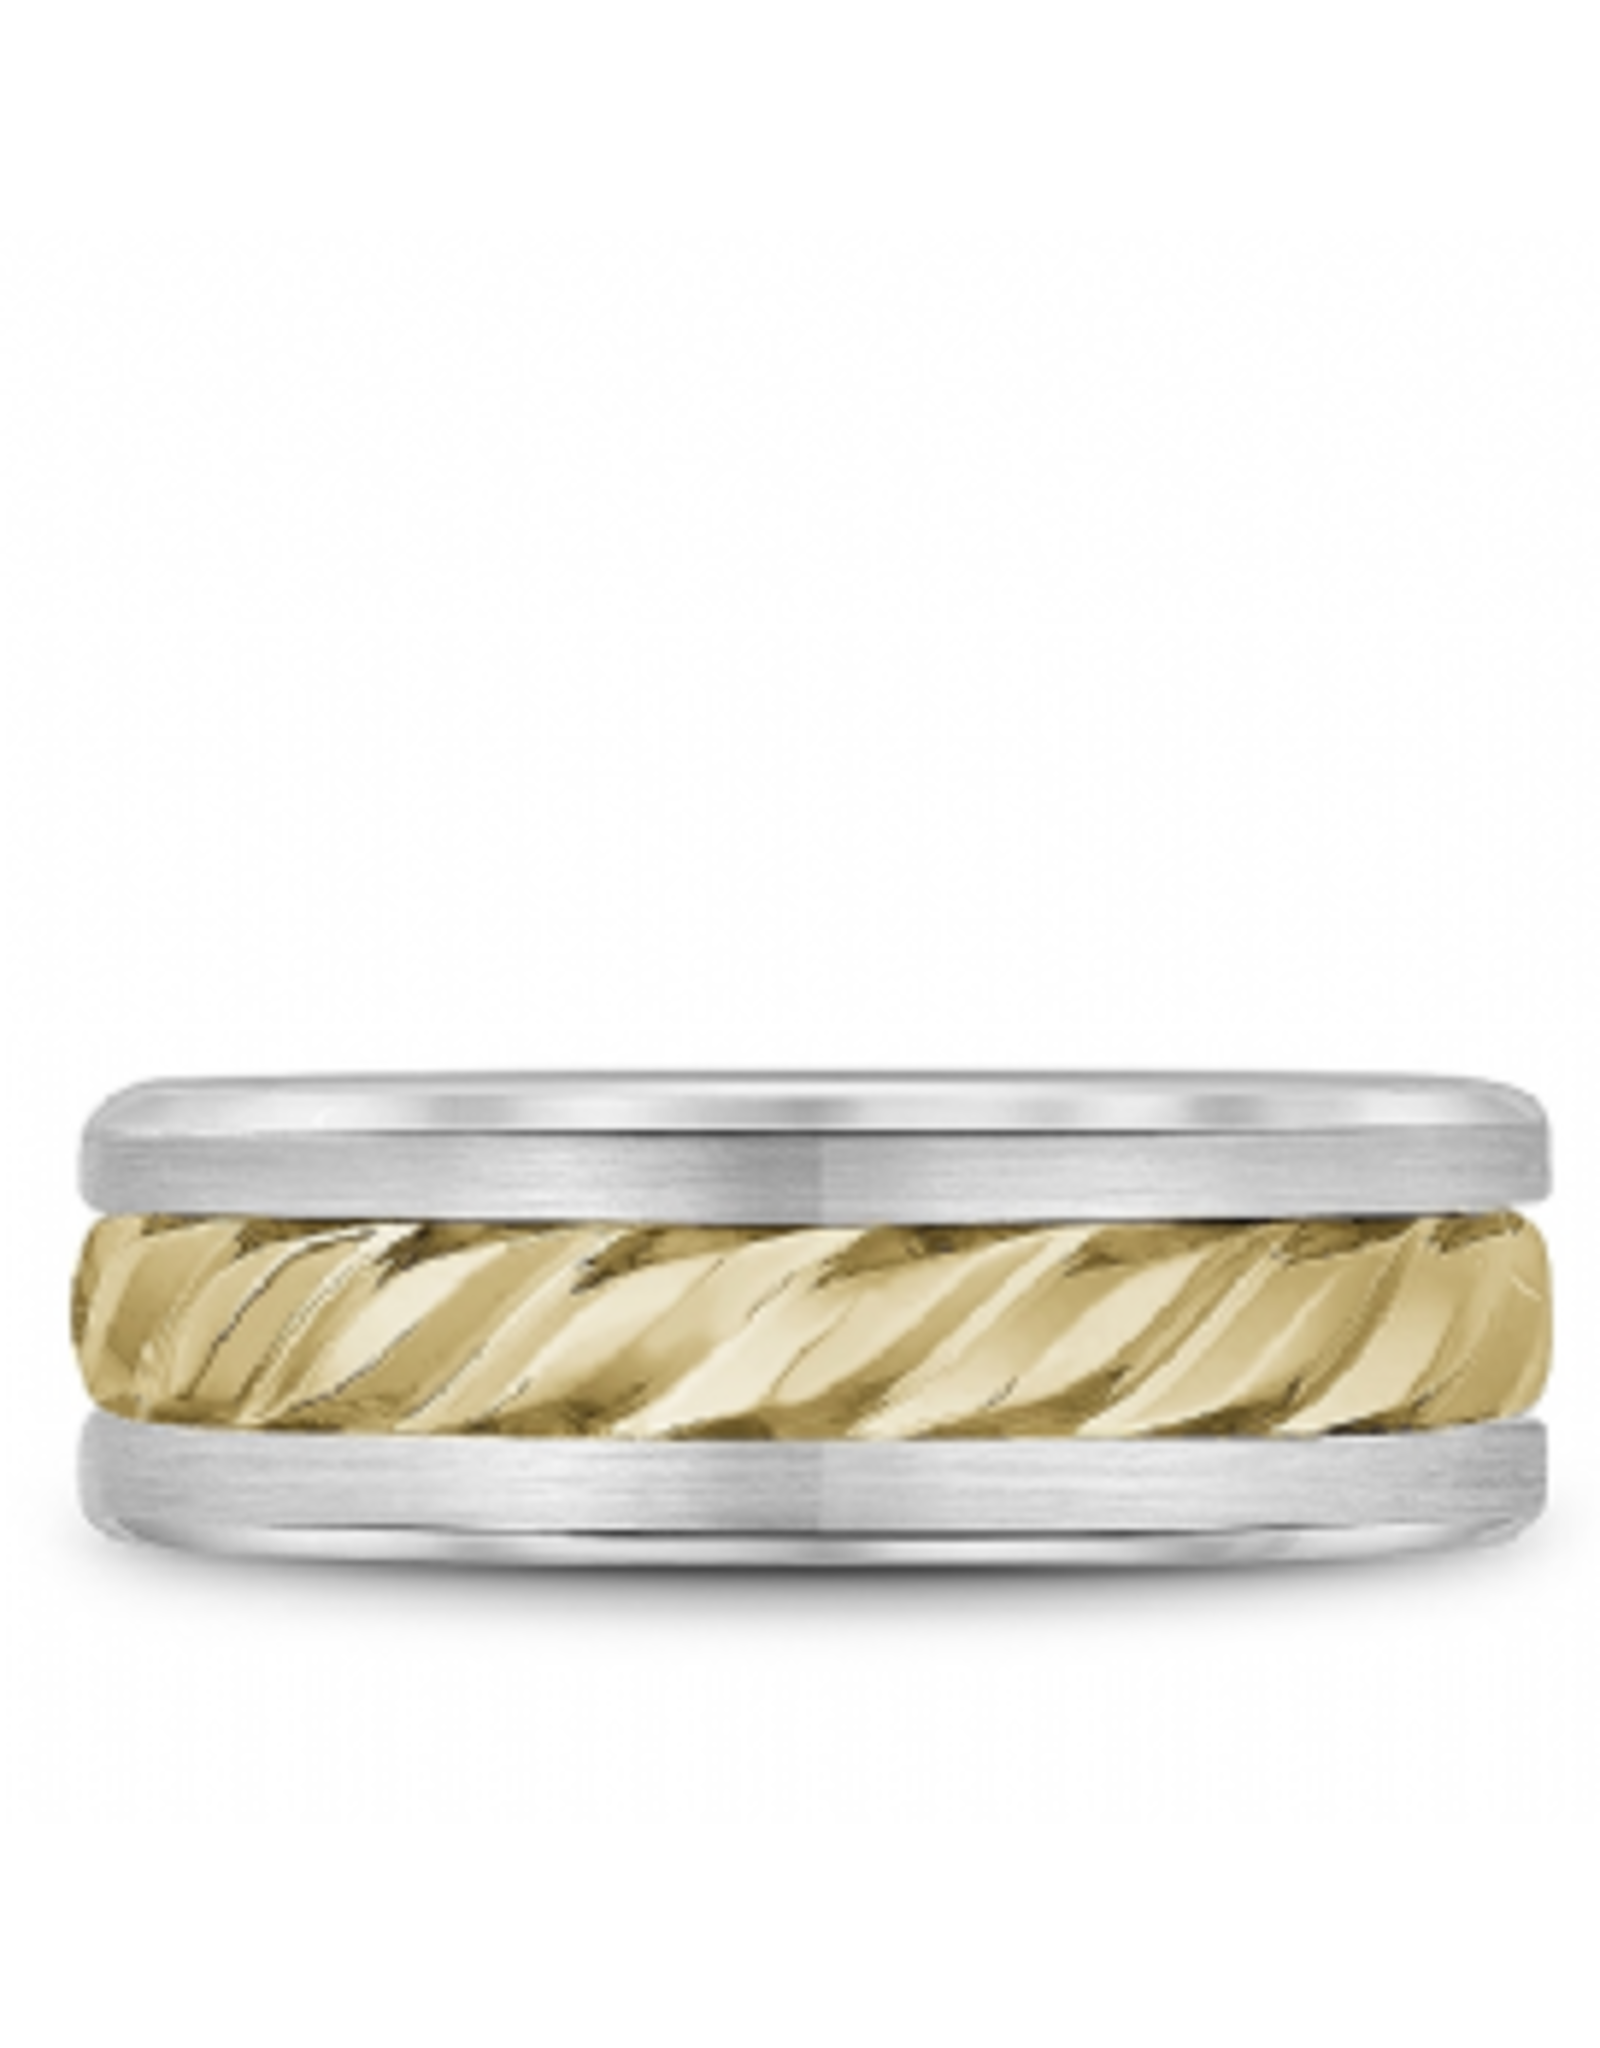 14K Yellow Gold & White Gold Band with Twisted Center & High Polish Edges -  8.5mm